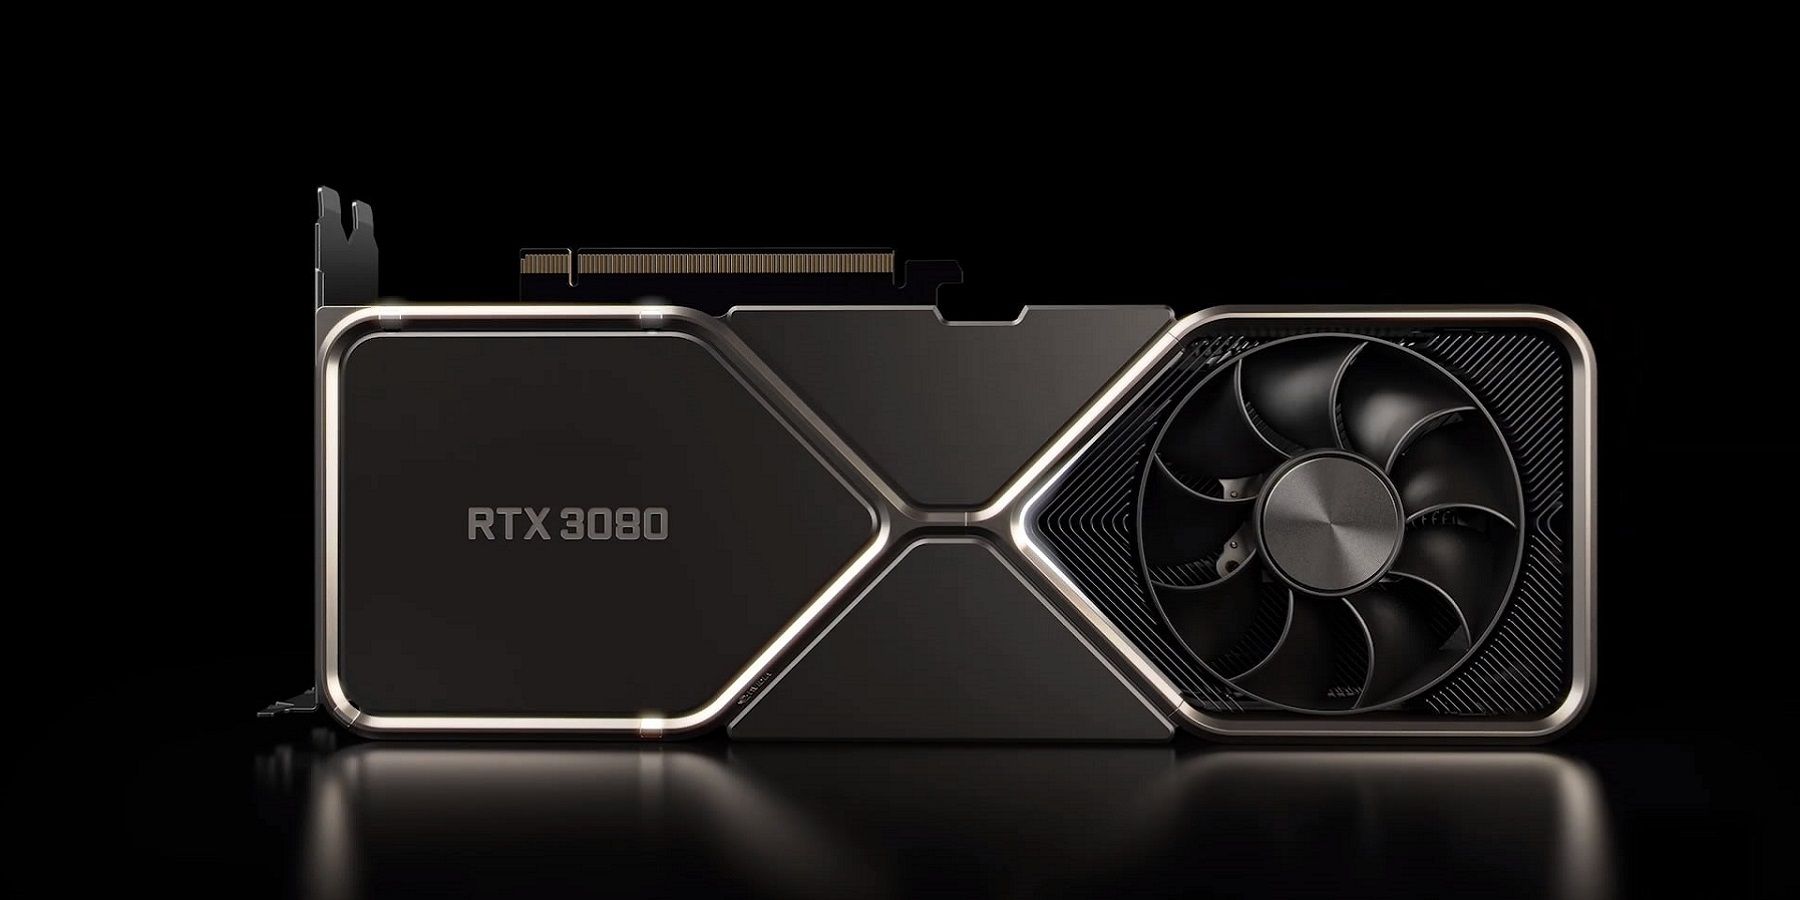 Photo of an Nvidia RTX 3080 graphics card on a black background.